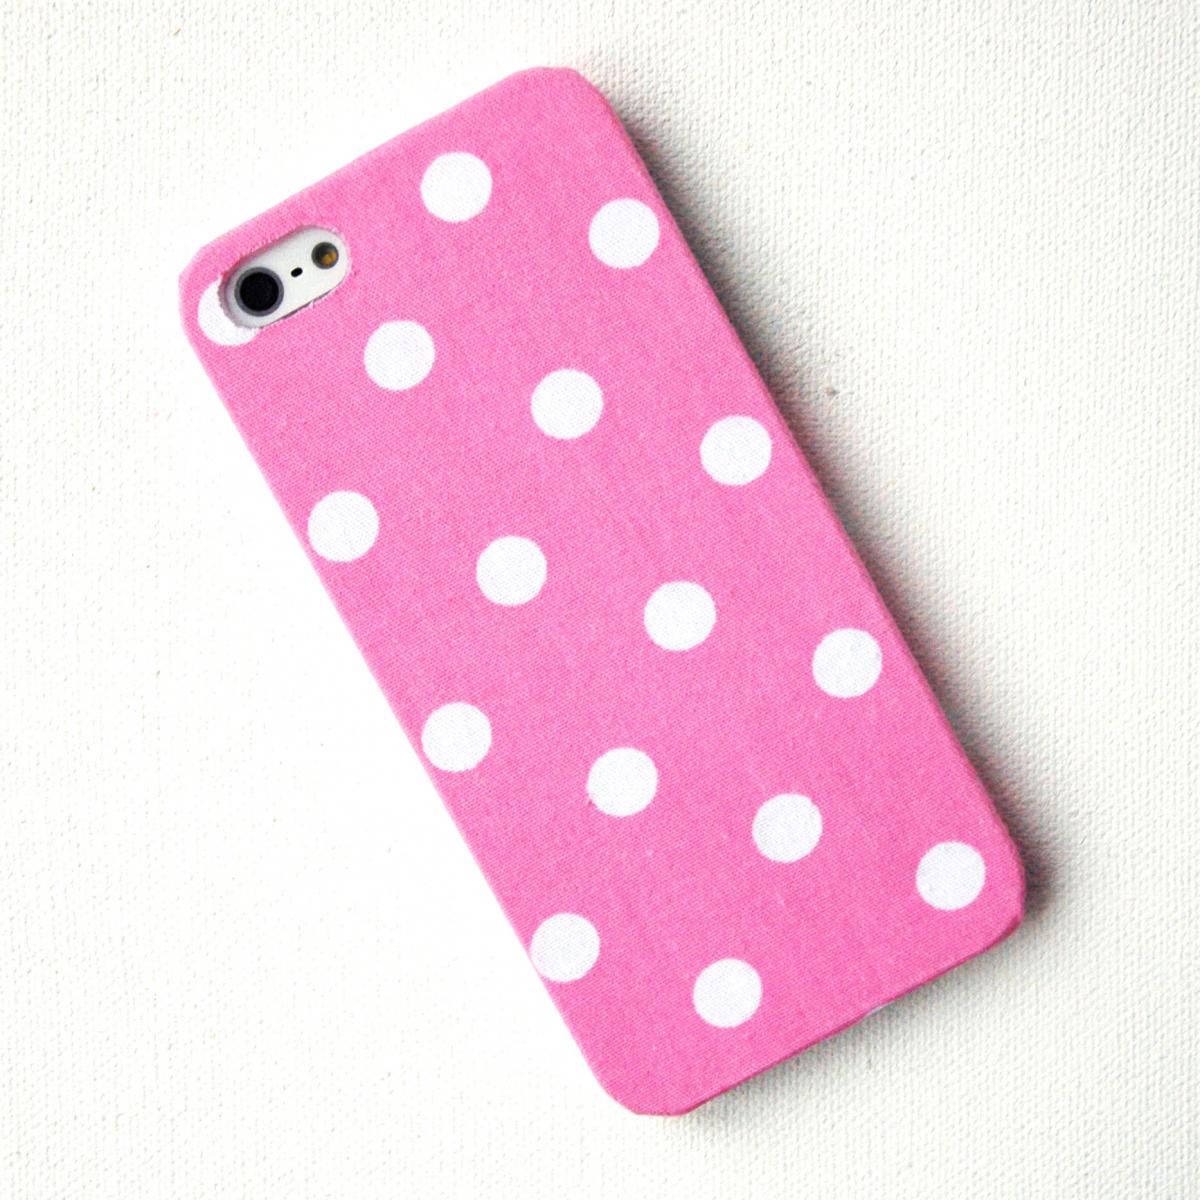 Iphone 5 Case In Pastel Pink Polka Dot, Iphone Case, Iphone Cover